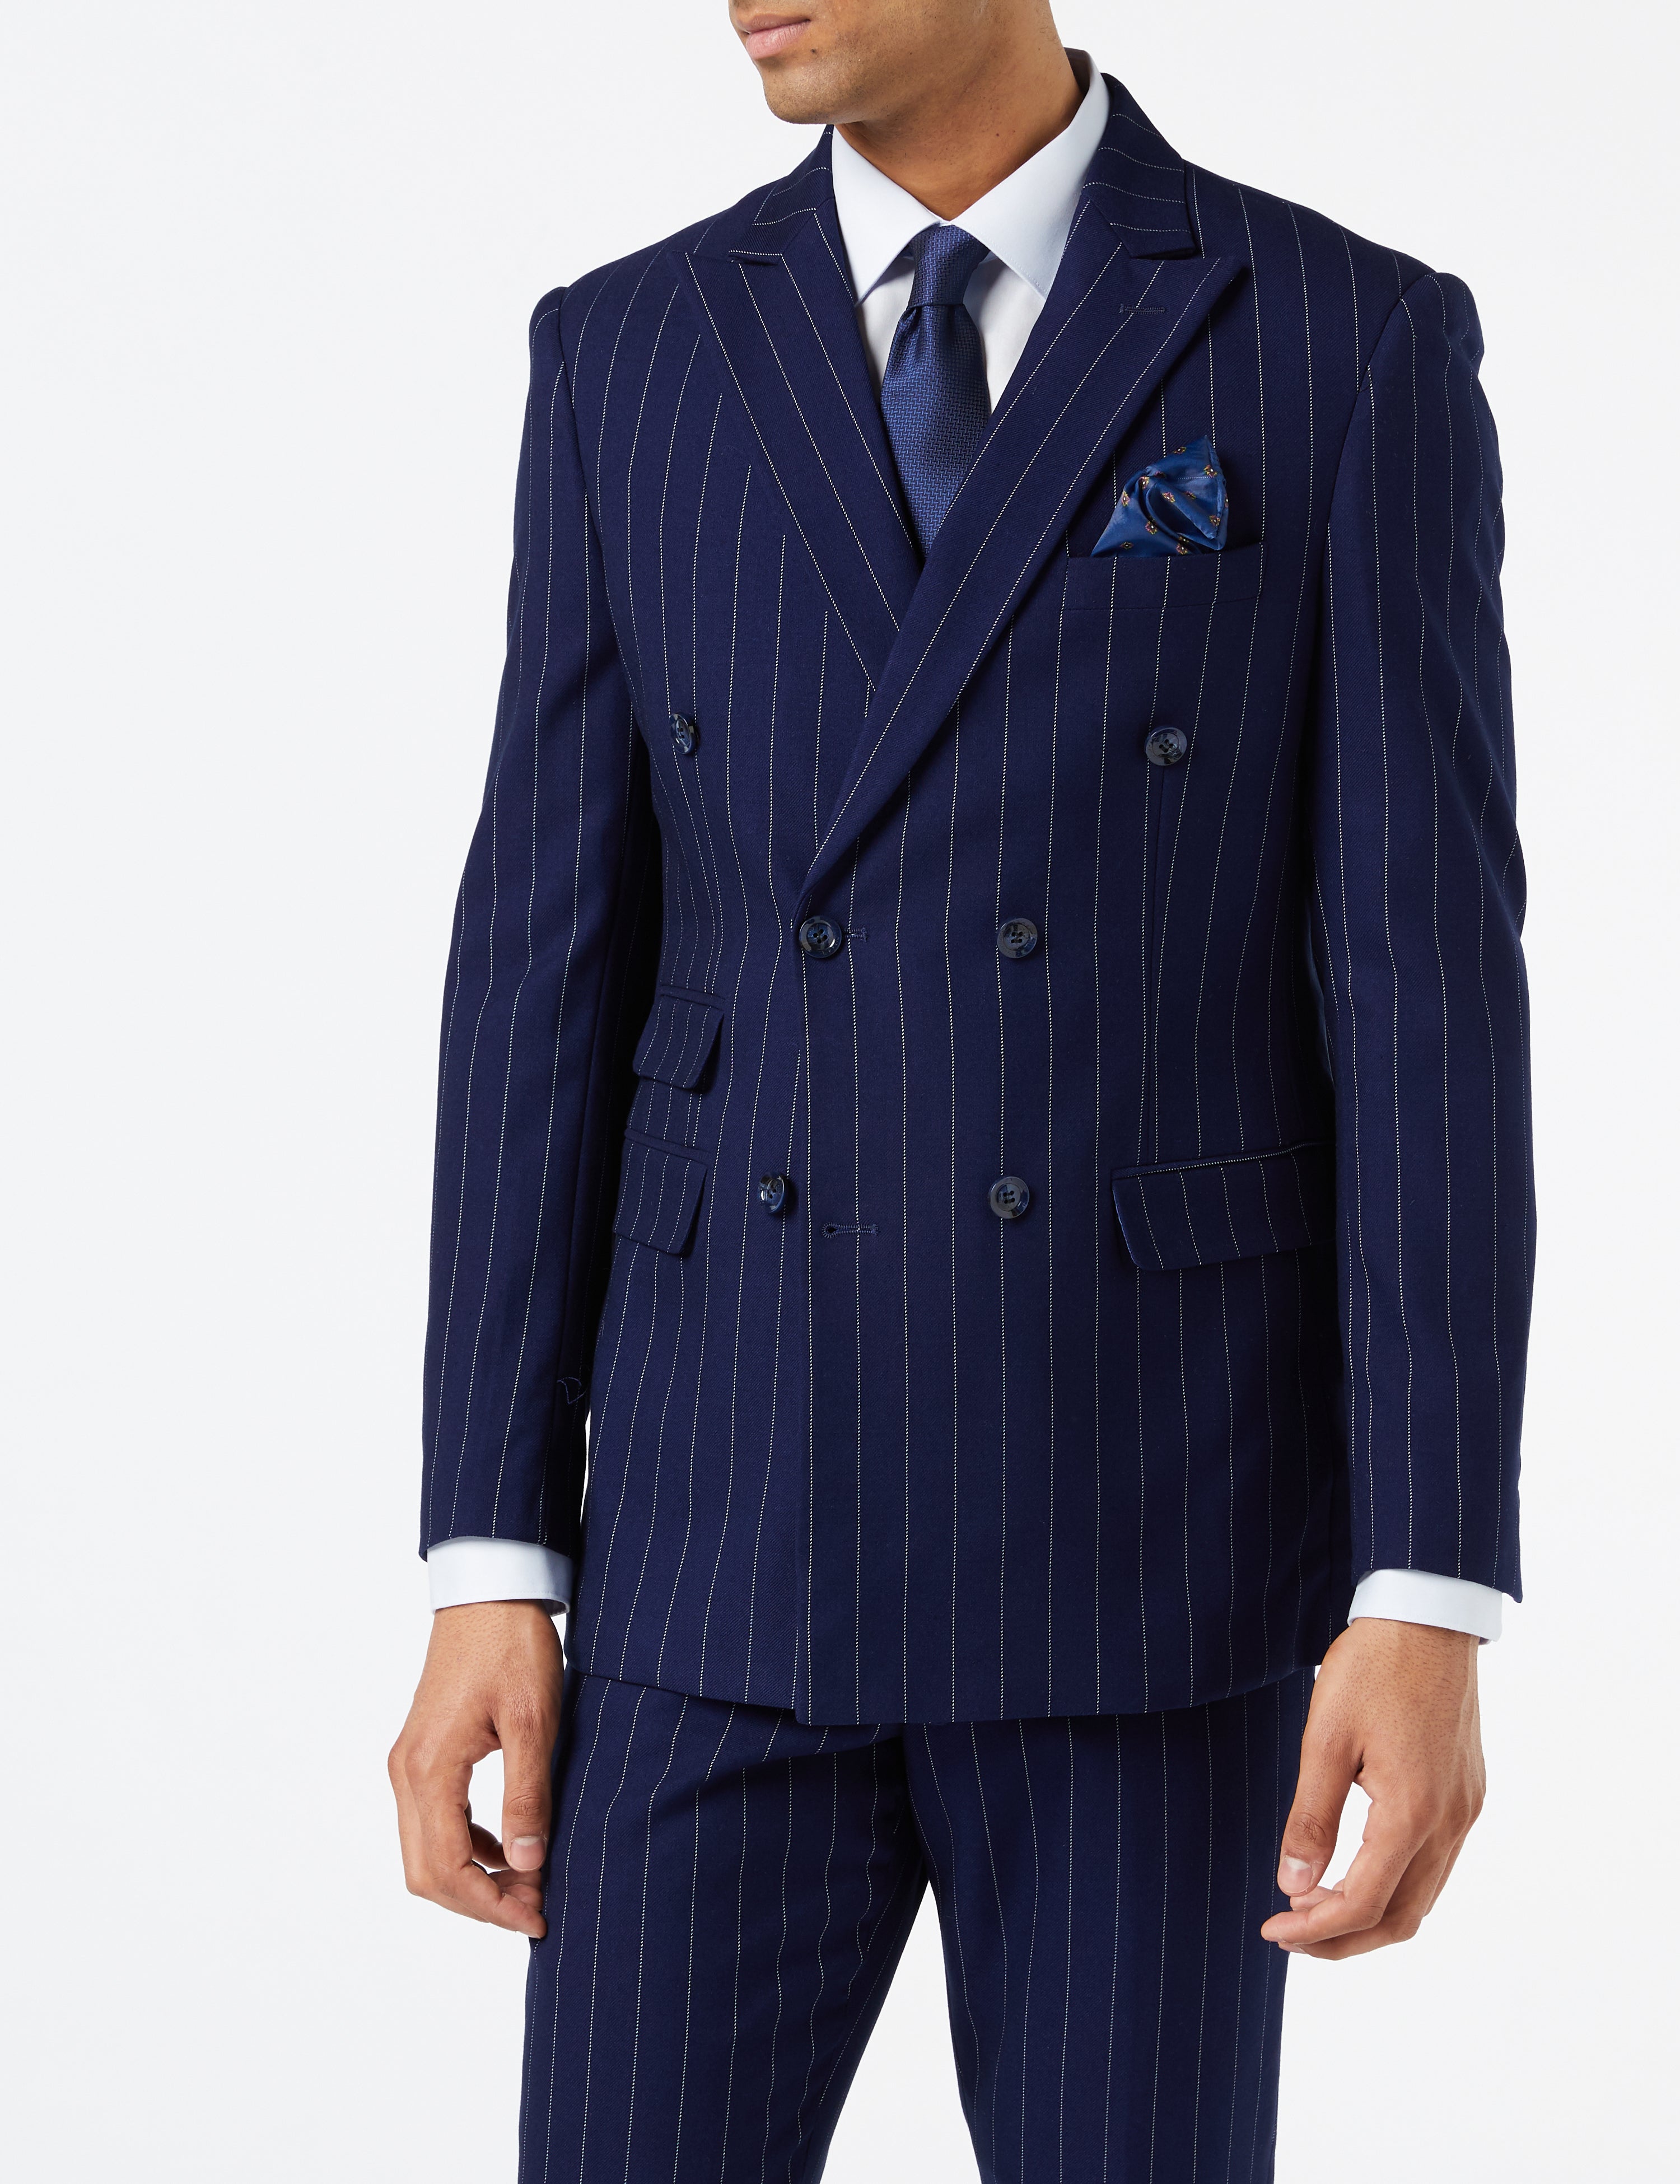 NAVY PINSTRIPE DOUBLE BREASTED SUIT